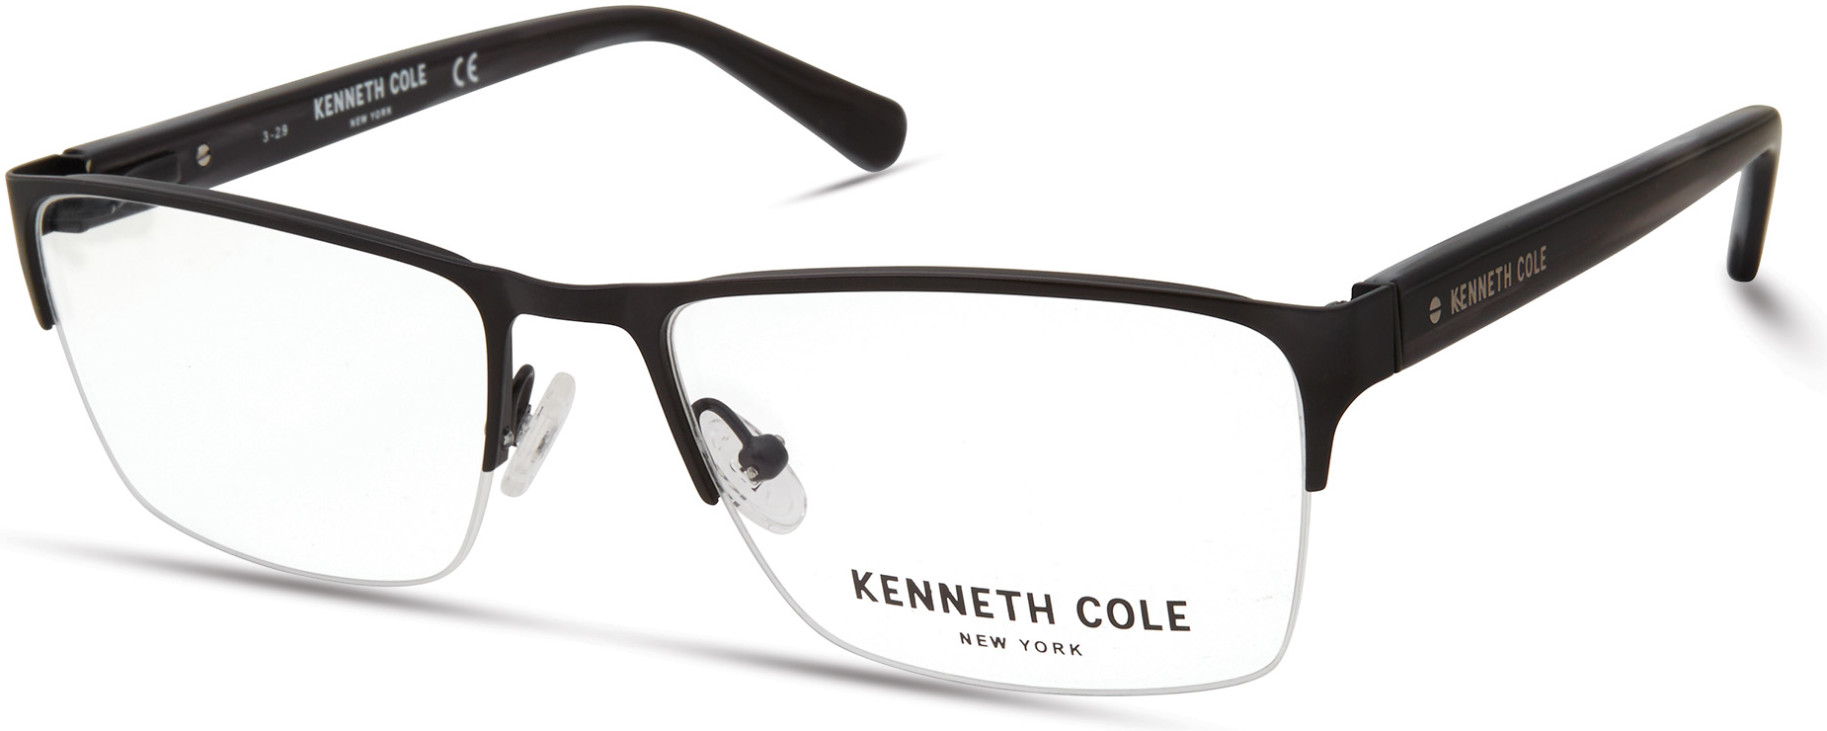 KENNETH COLE NY 0313